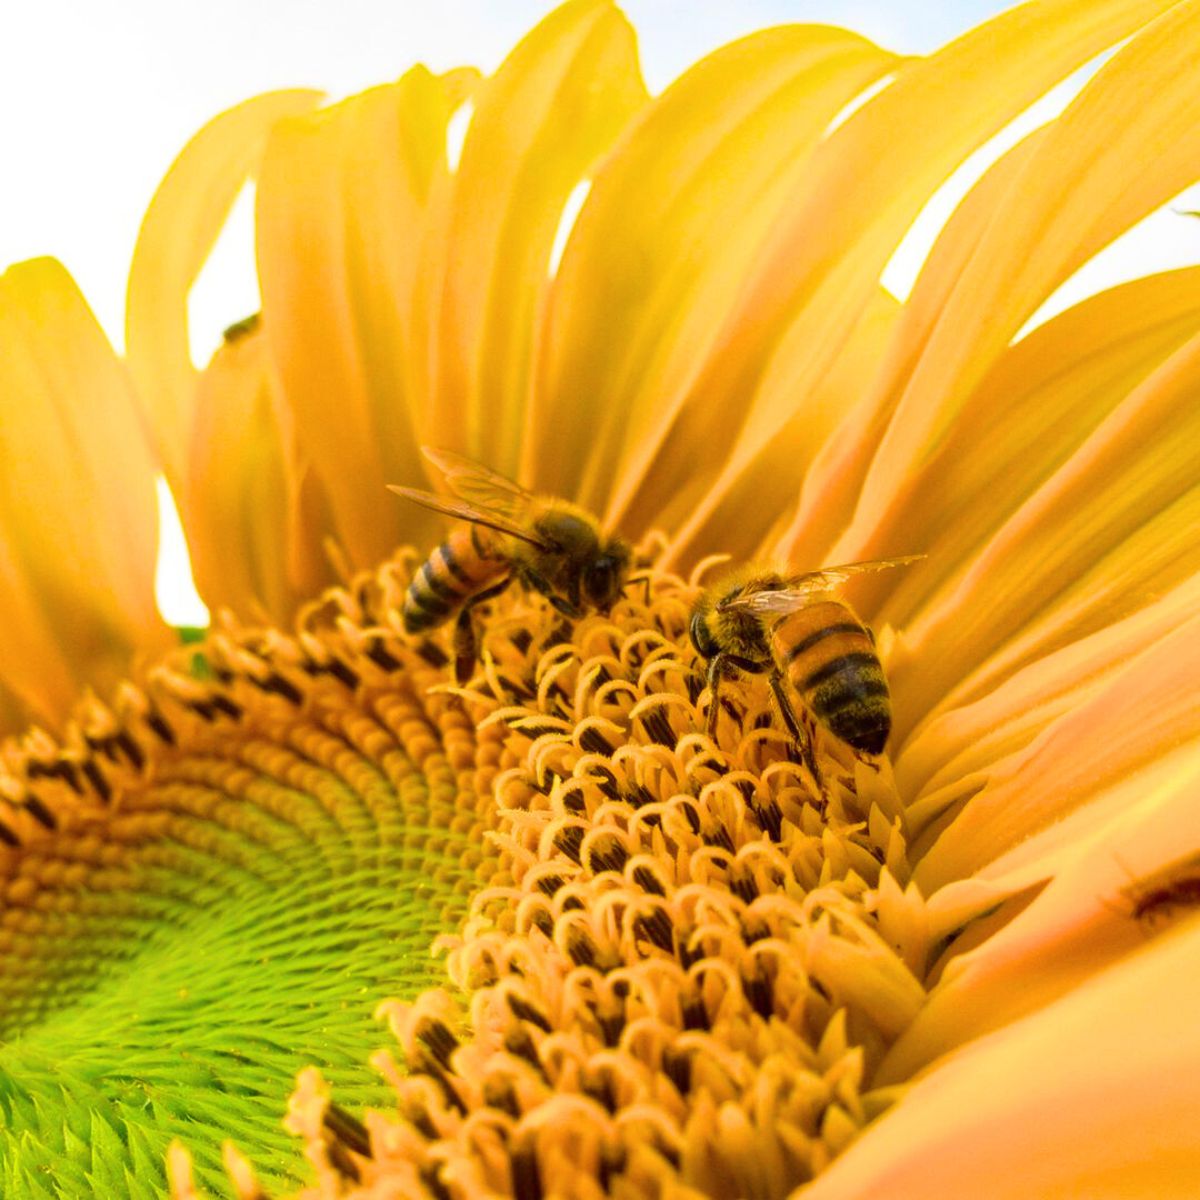 Bees pollinating on a sunflower